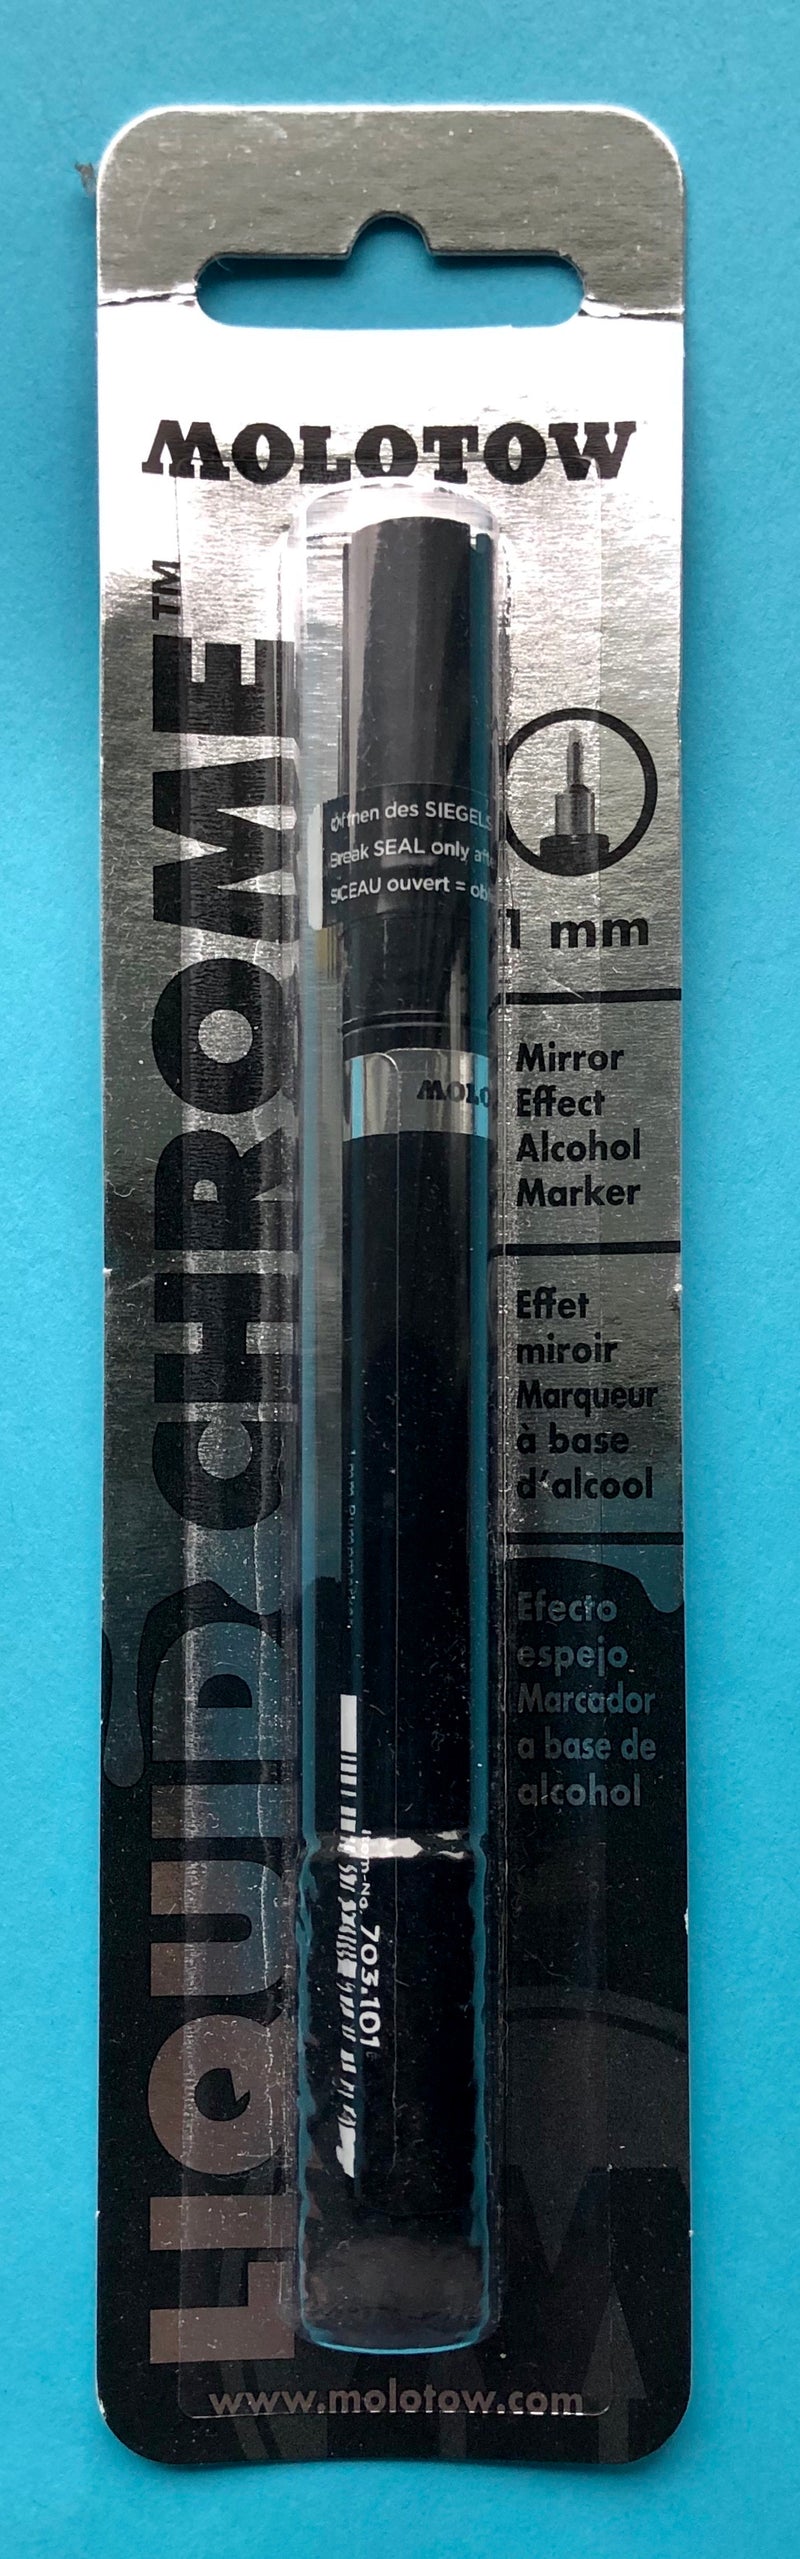 MLW-101 Molotow Marker-1mm – J&J Scale